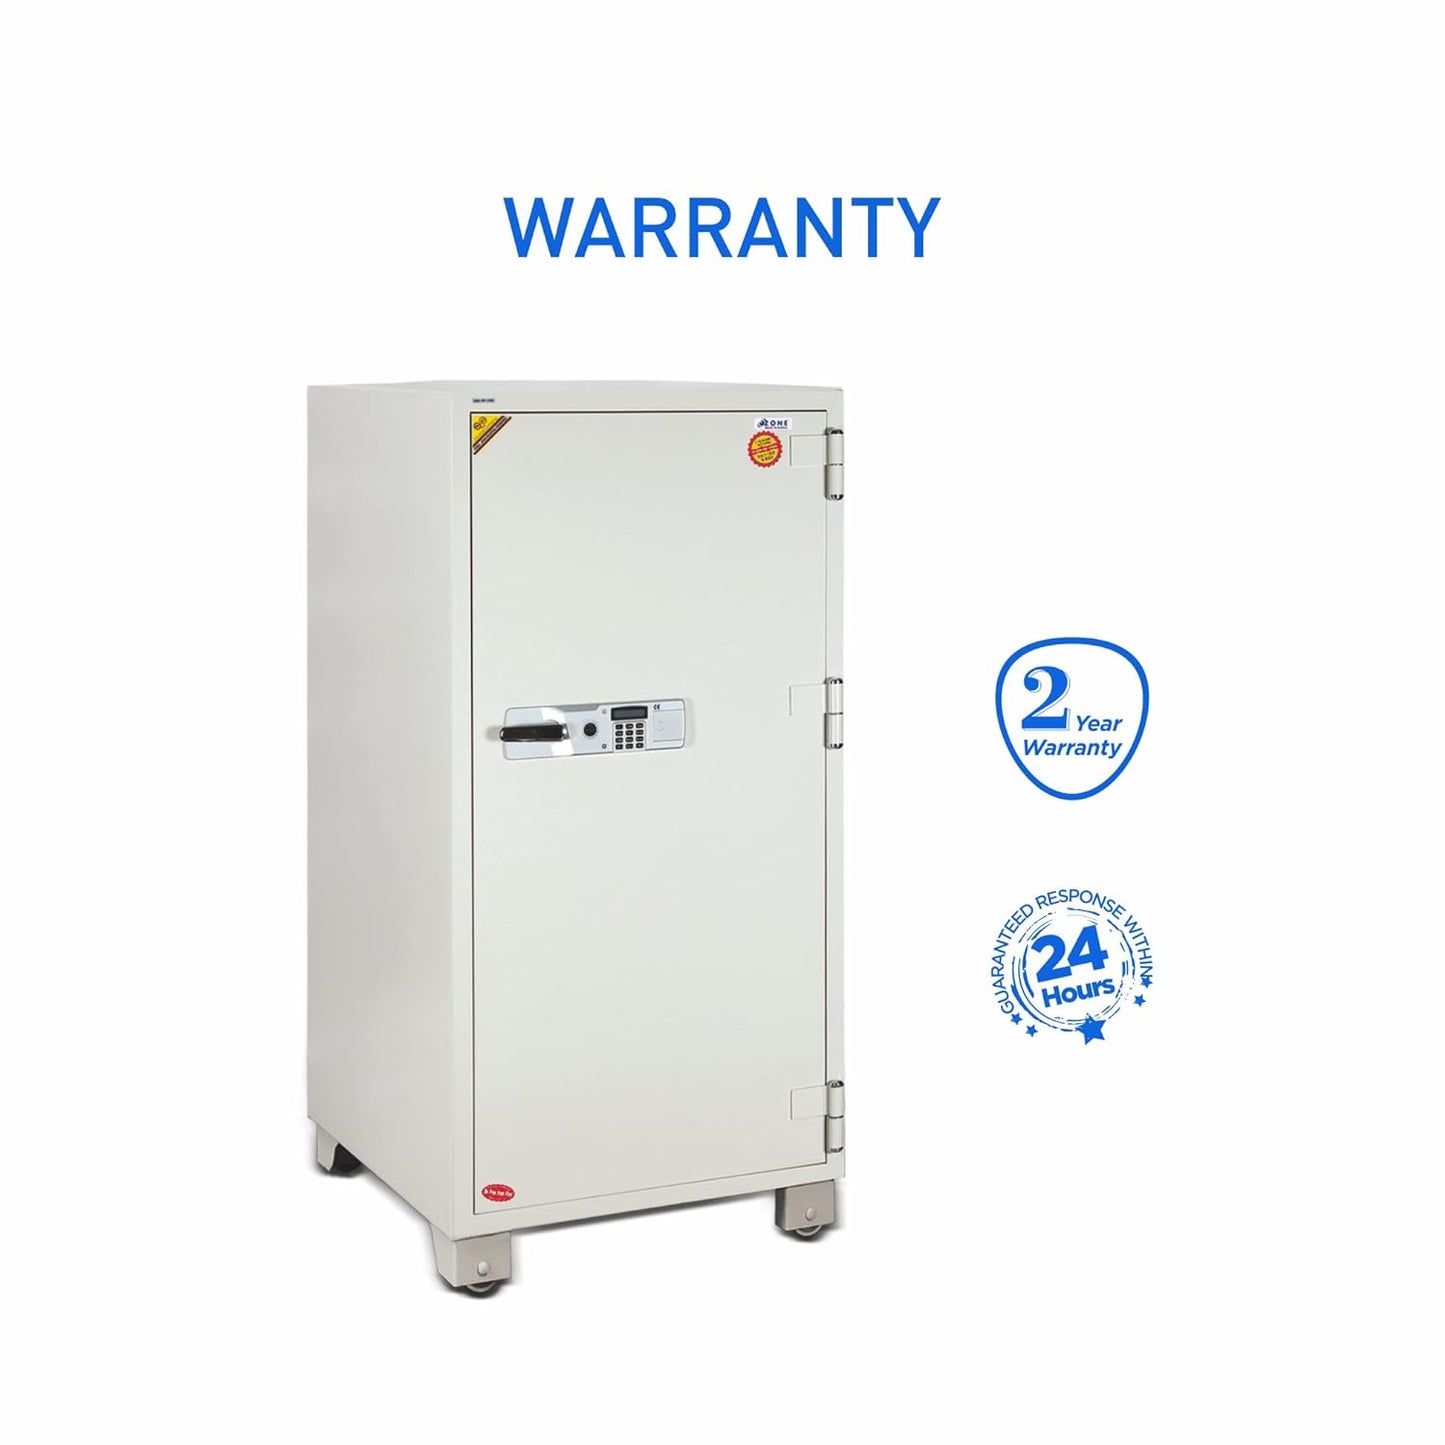 Ozone Fire-resistant Safe for Home & Business | 2-way Access | Password & Emergency Key (230 Ltrs.)